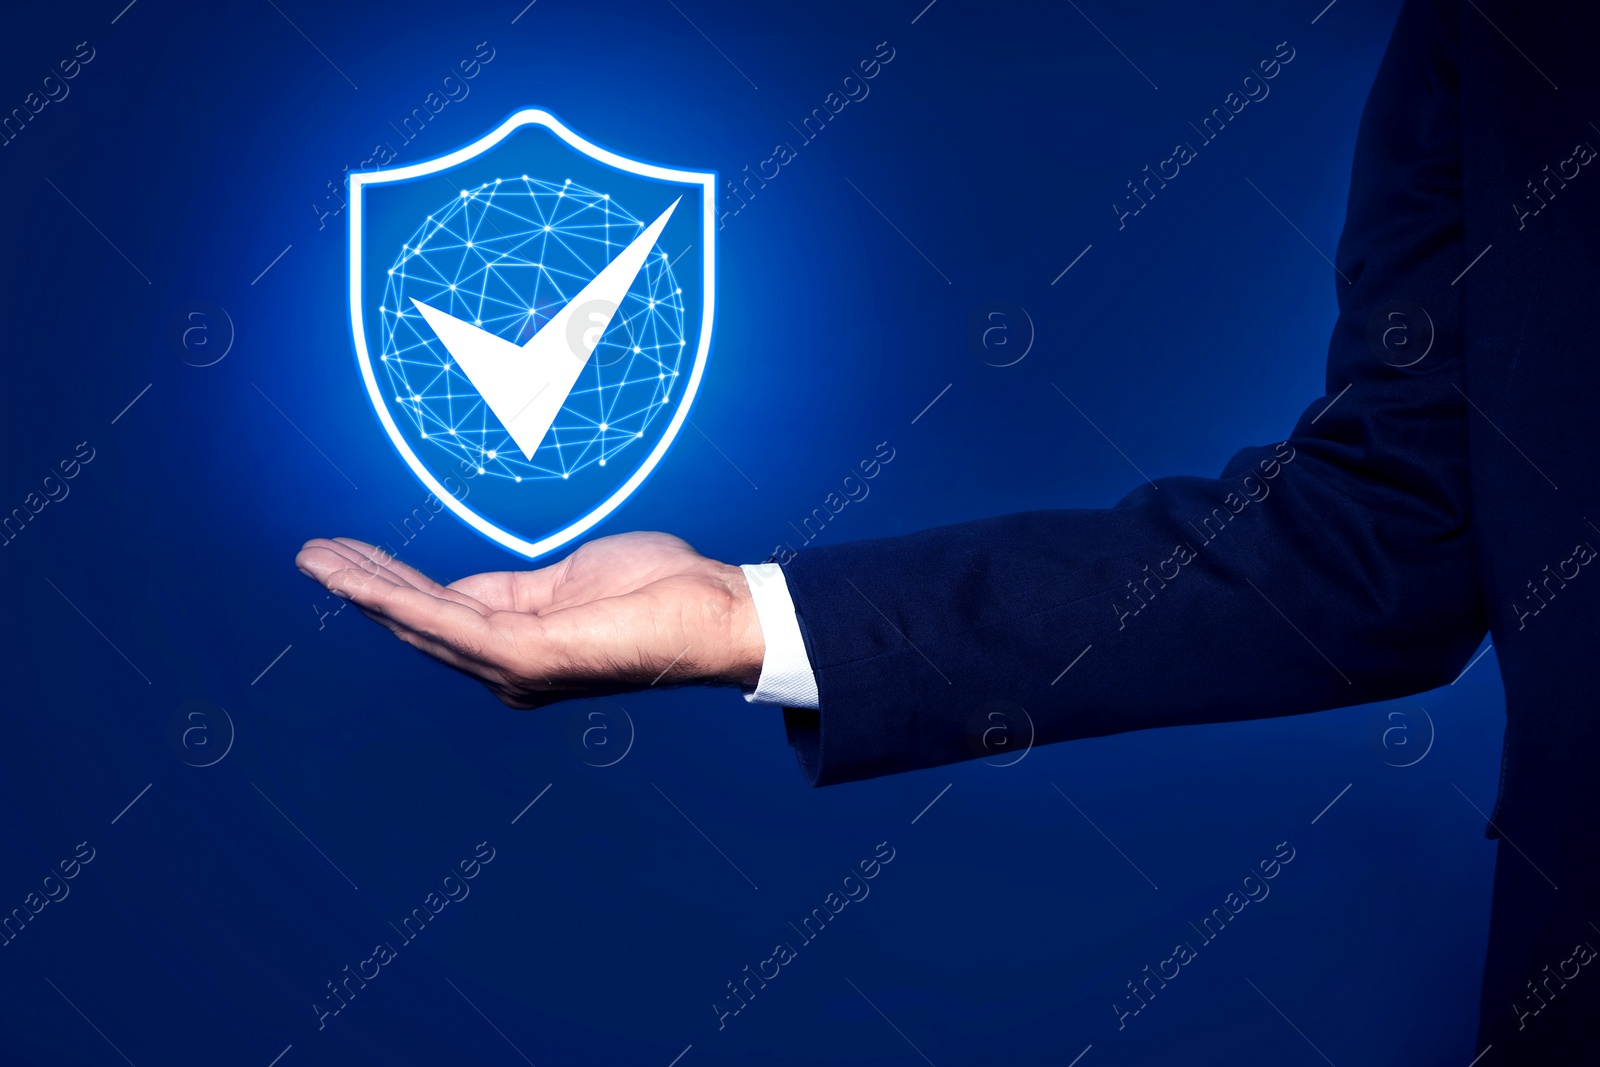 Image of Anti-fraud security system. Man with illustration of checkmark in shield on blue background, closeup